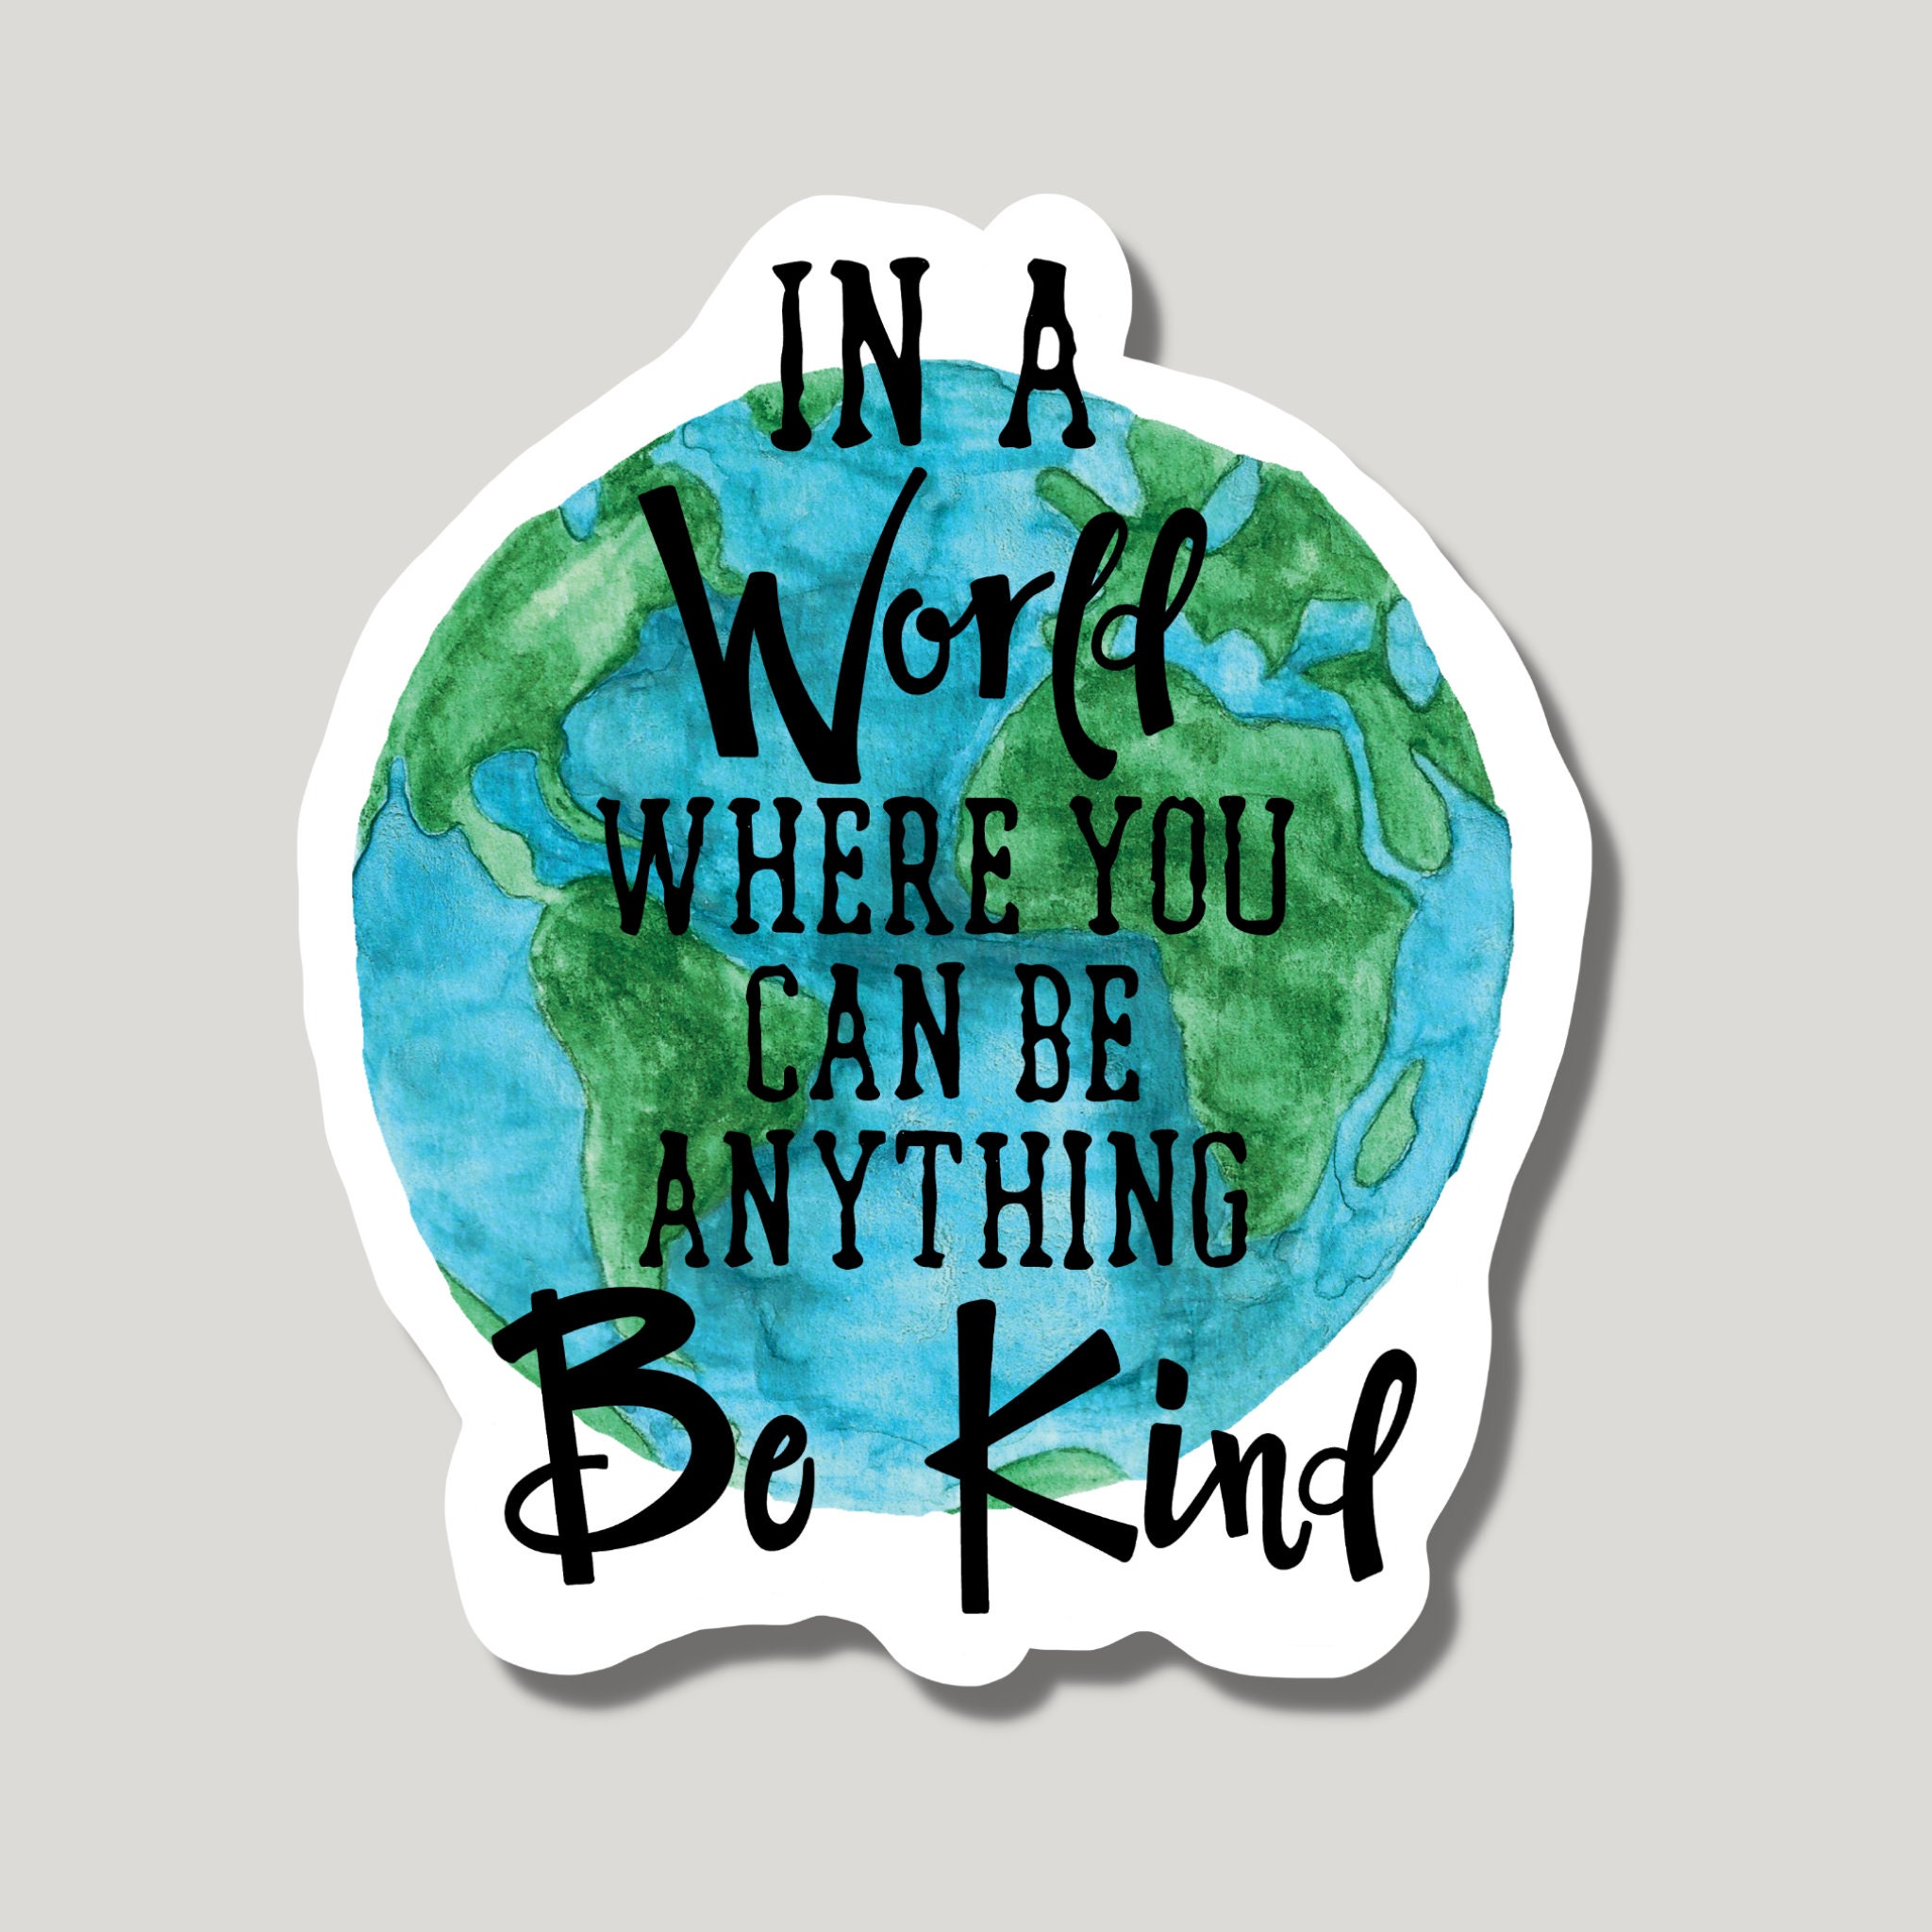 In a World Where You Can Be Anything Be Kind Sticker Be Kind | Etsy